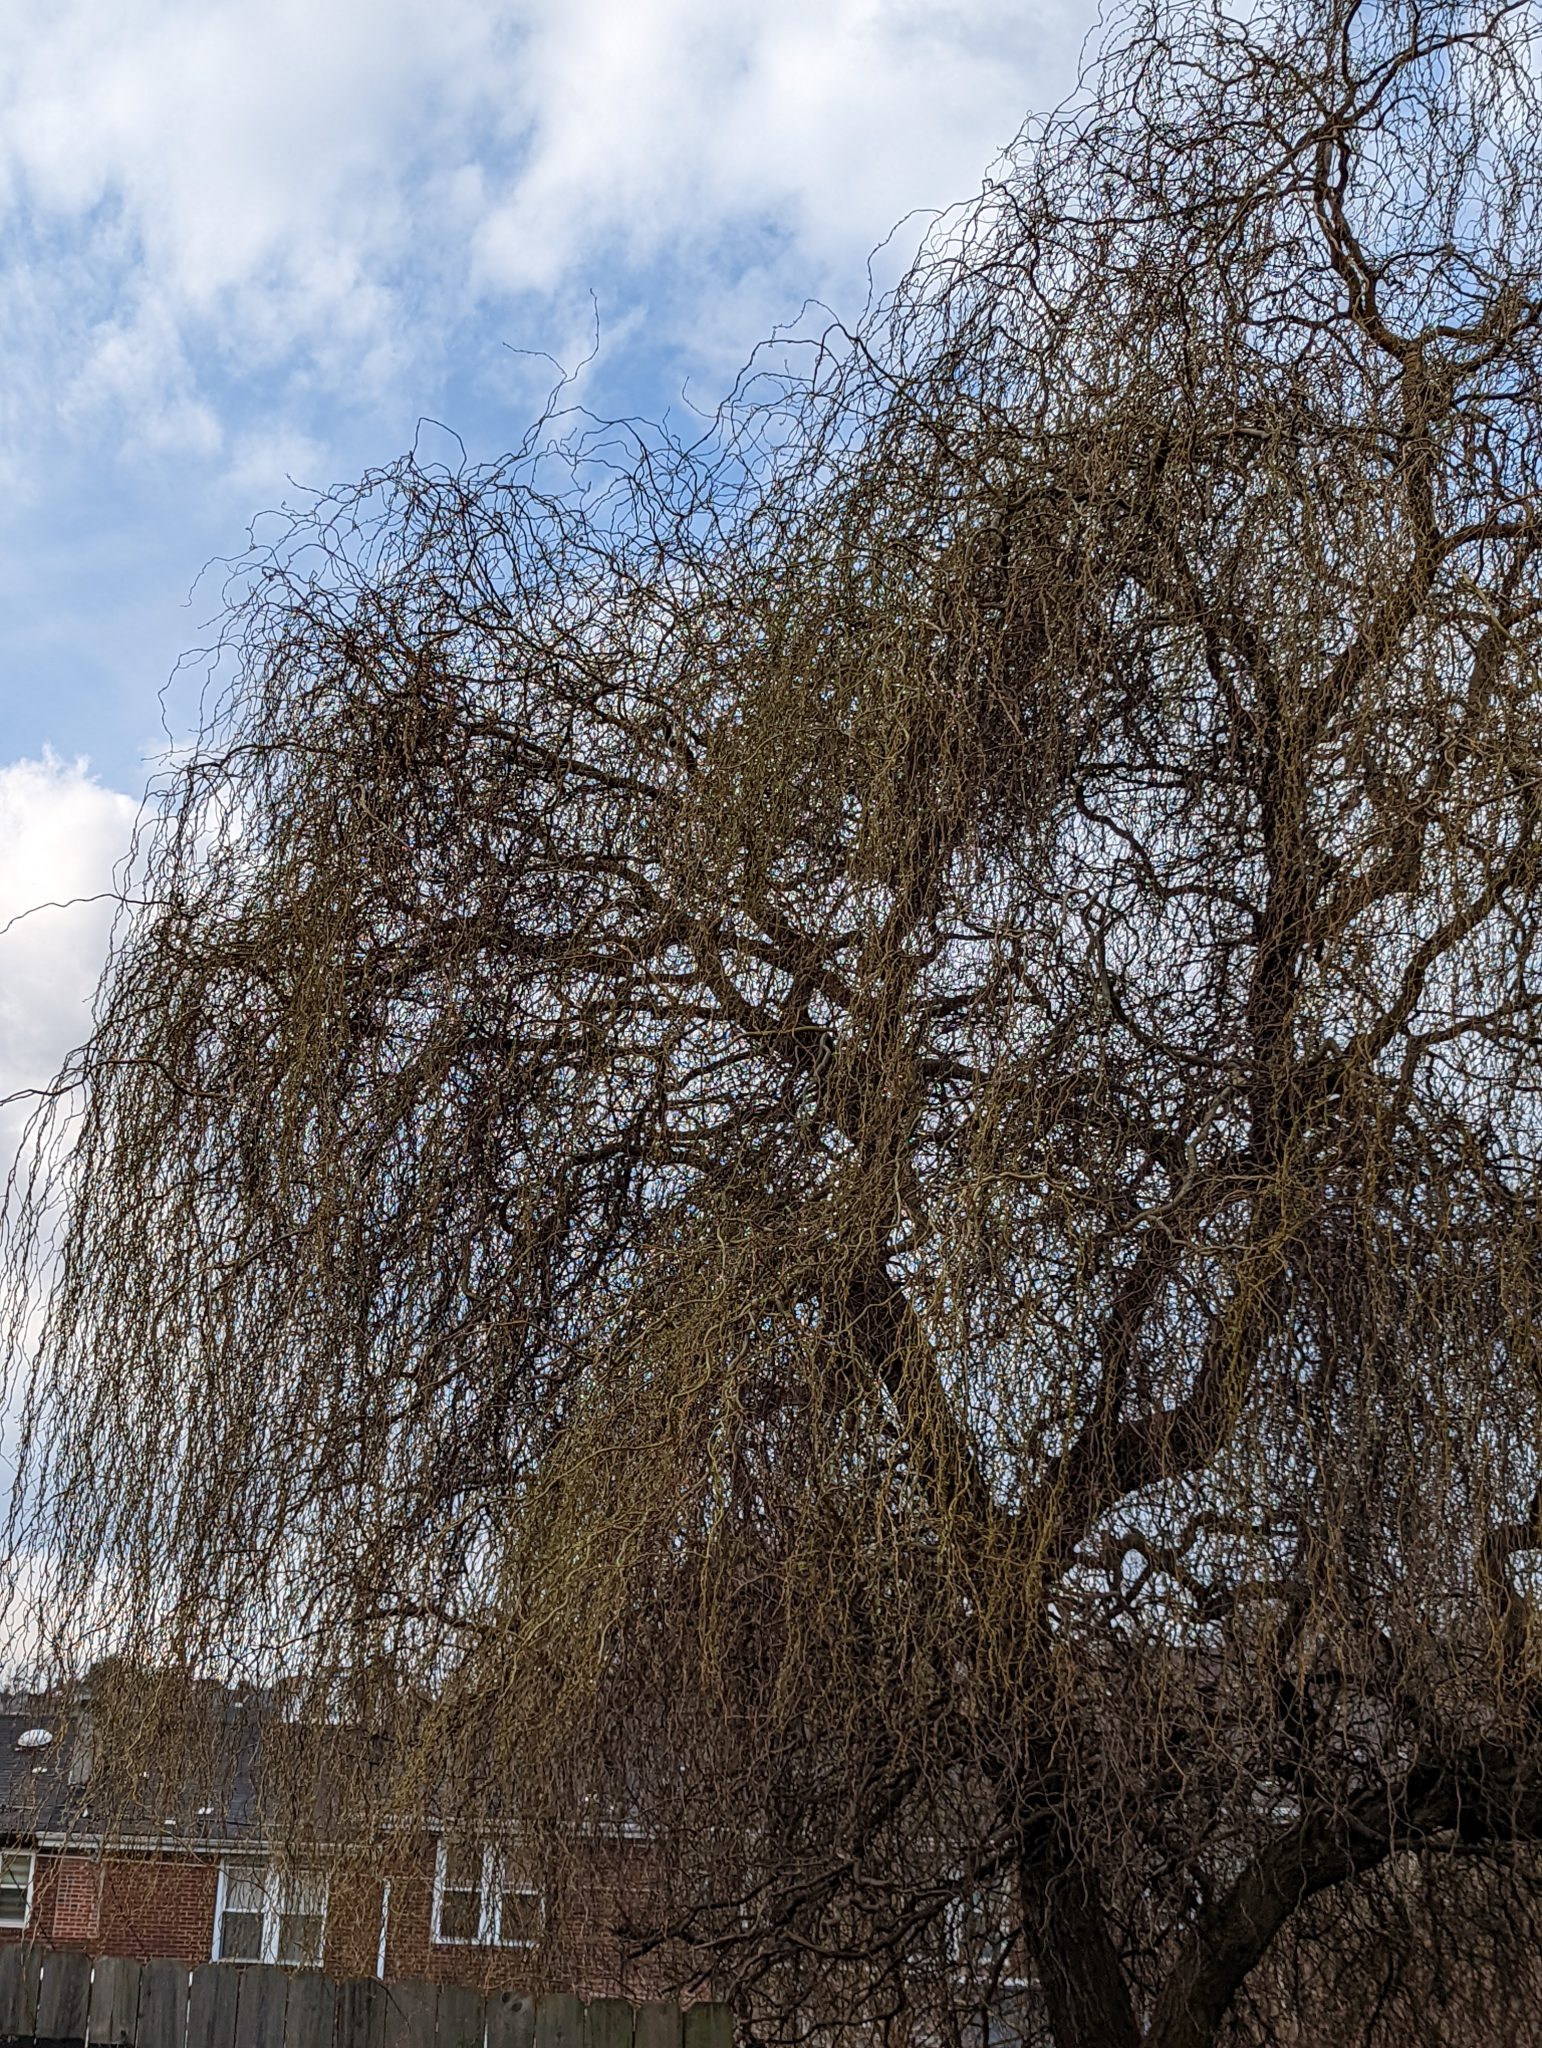 A willow tree, with just a little bit of green on it